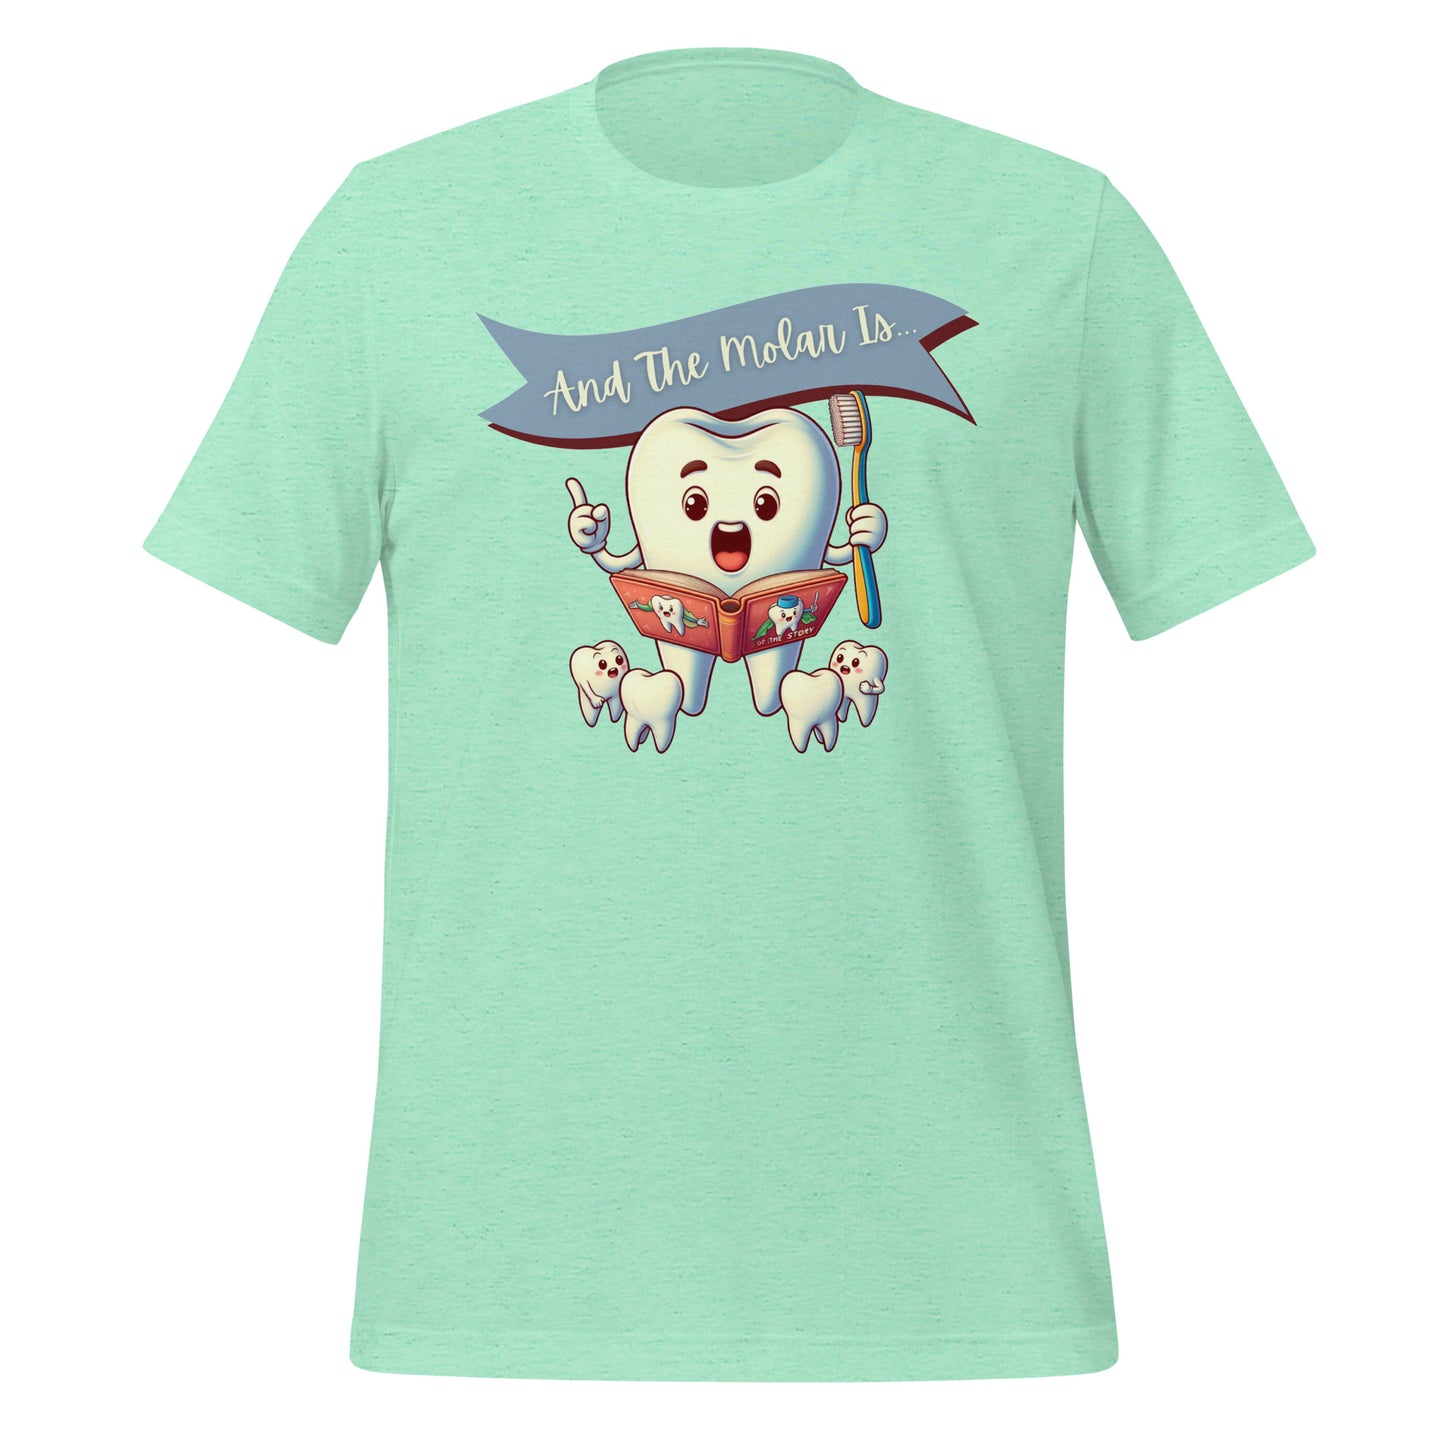 Cute dental shirt featuring a smiling tooth character reading a book with the caption ‘And The Molar Is,’ surrounded by smaller tooth characters. Heather mint  color.